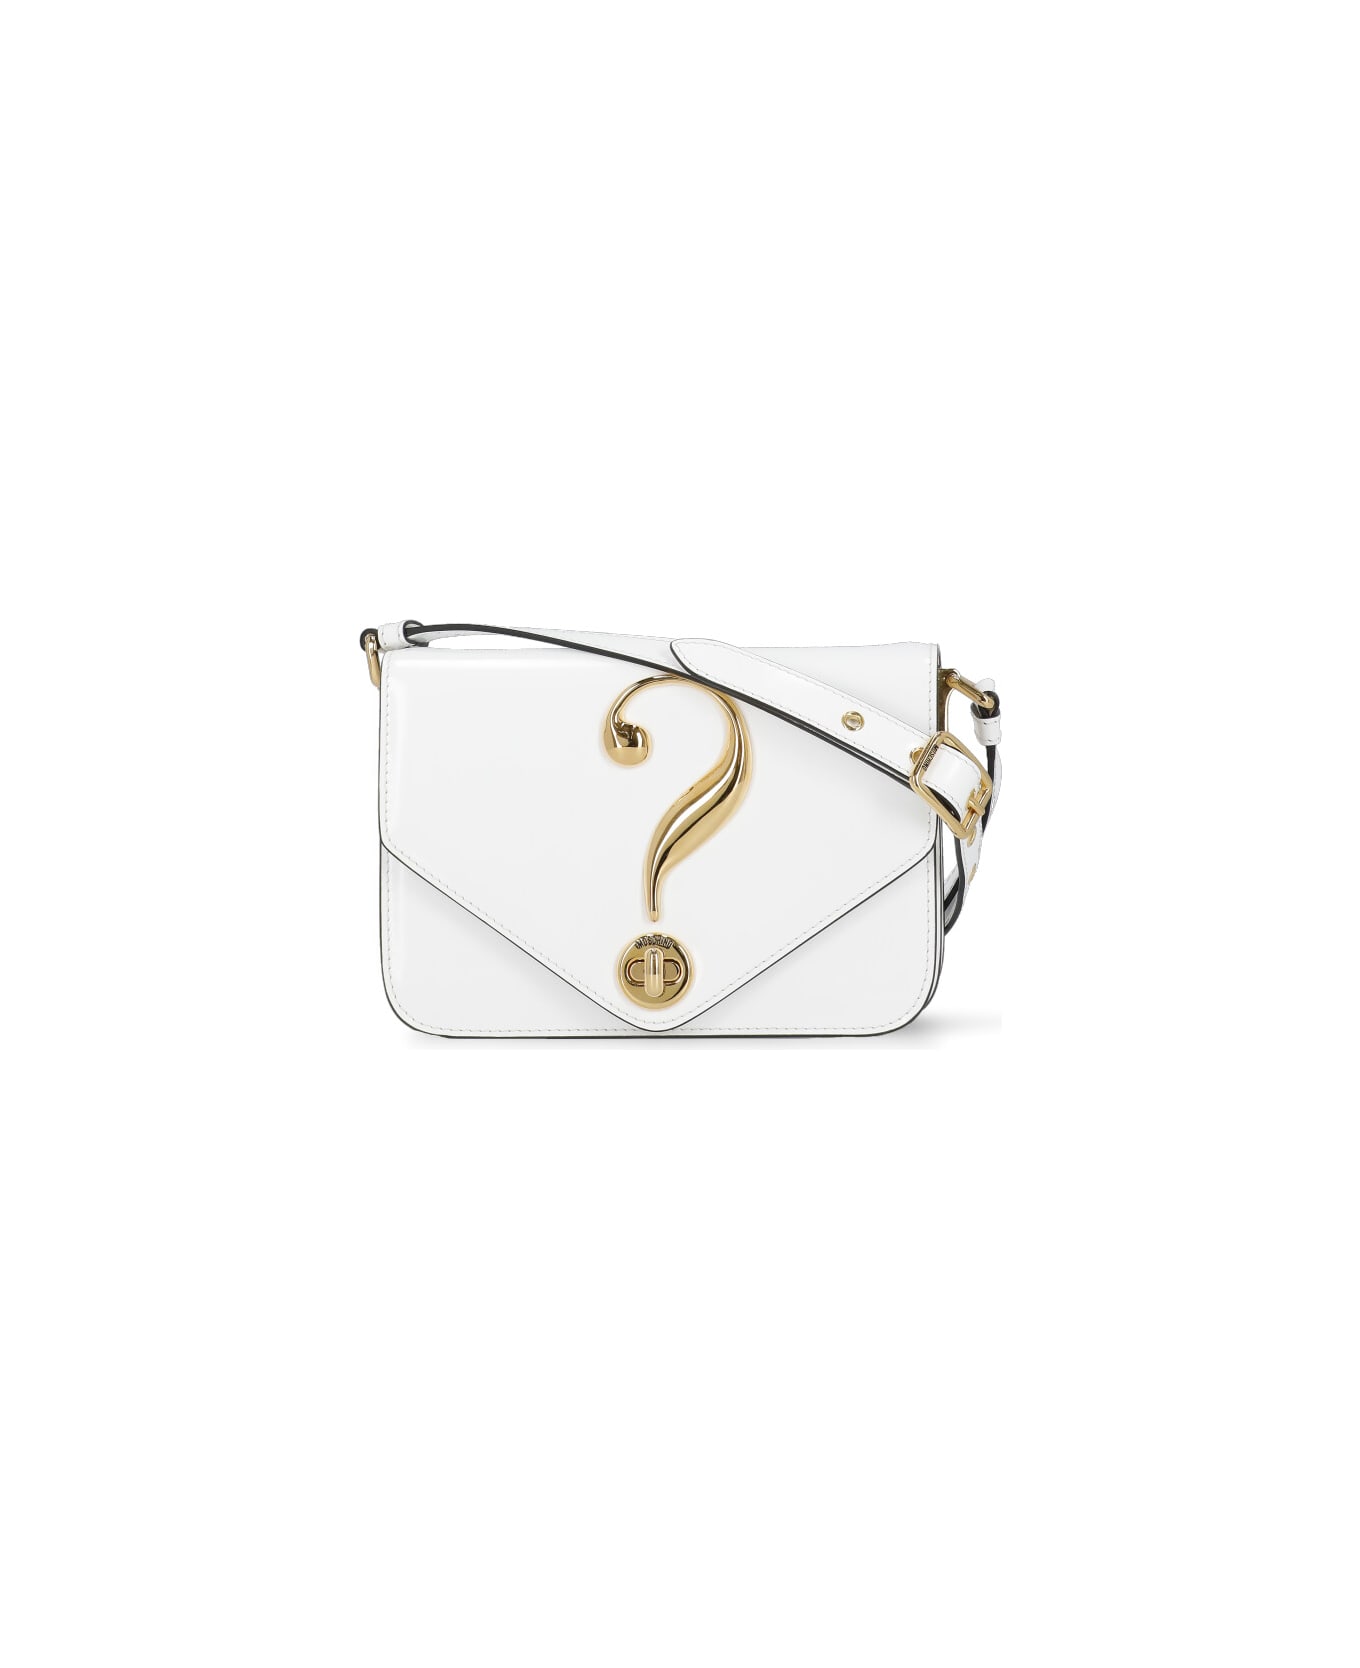 Moschino Leather Shoulder Bag - White ショルダーバッグ